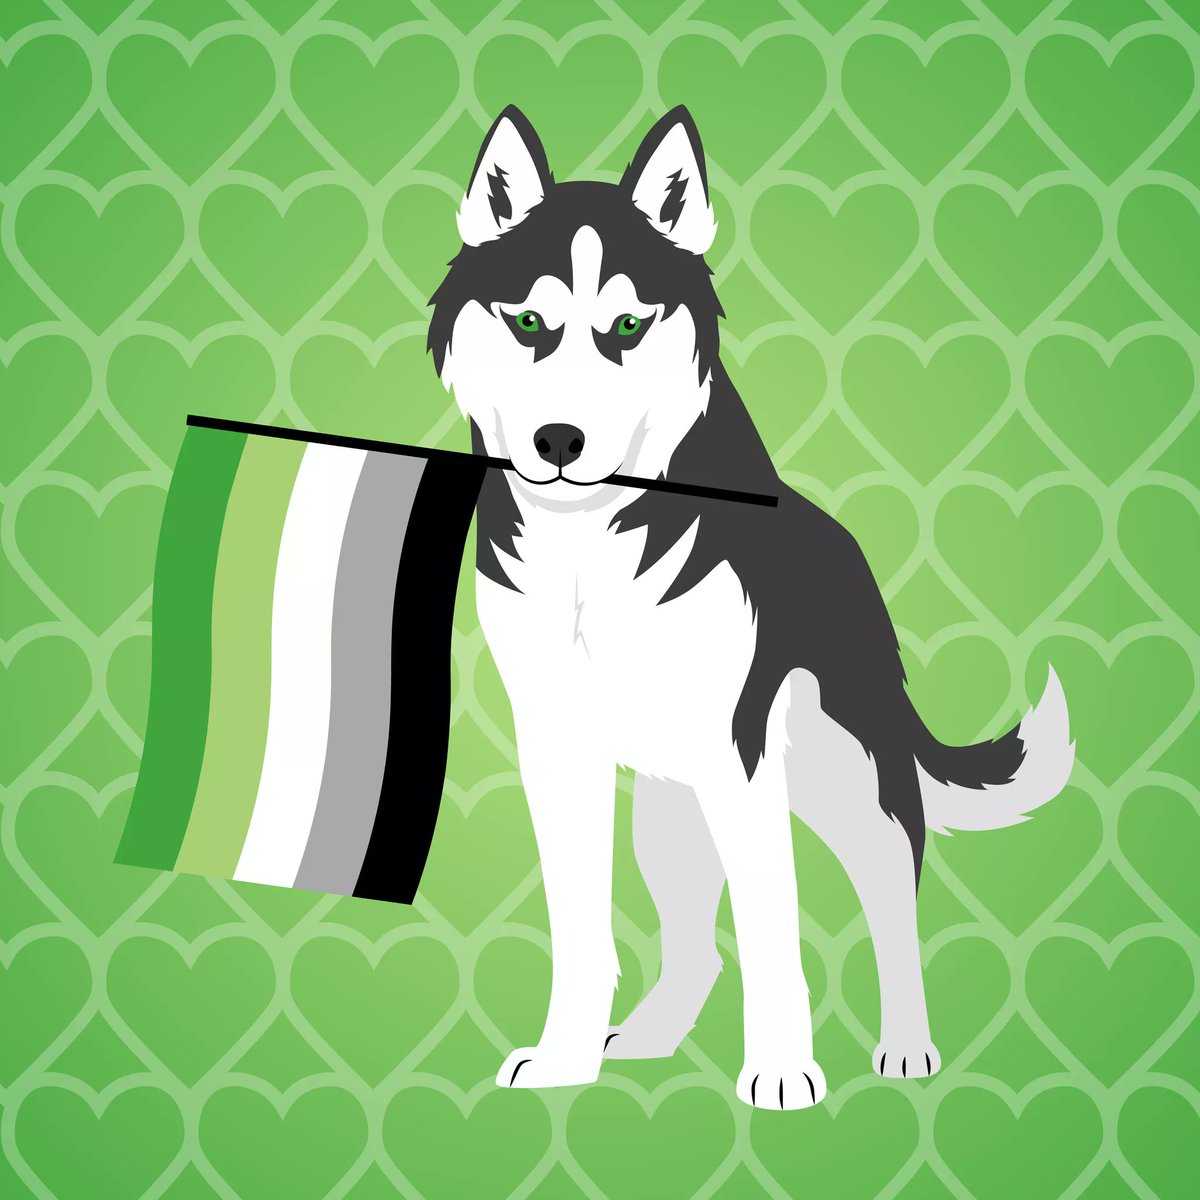 Part 8 of the Pride Animal illustrations. This is the Aromantic pride flag. An Aromantic person does not feel romantic attraction. 

#pride #aromantic #aro #aropride #pride2021 #prideflag #aromanticflag #aroflag